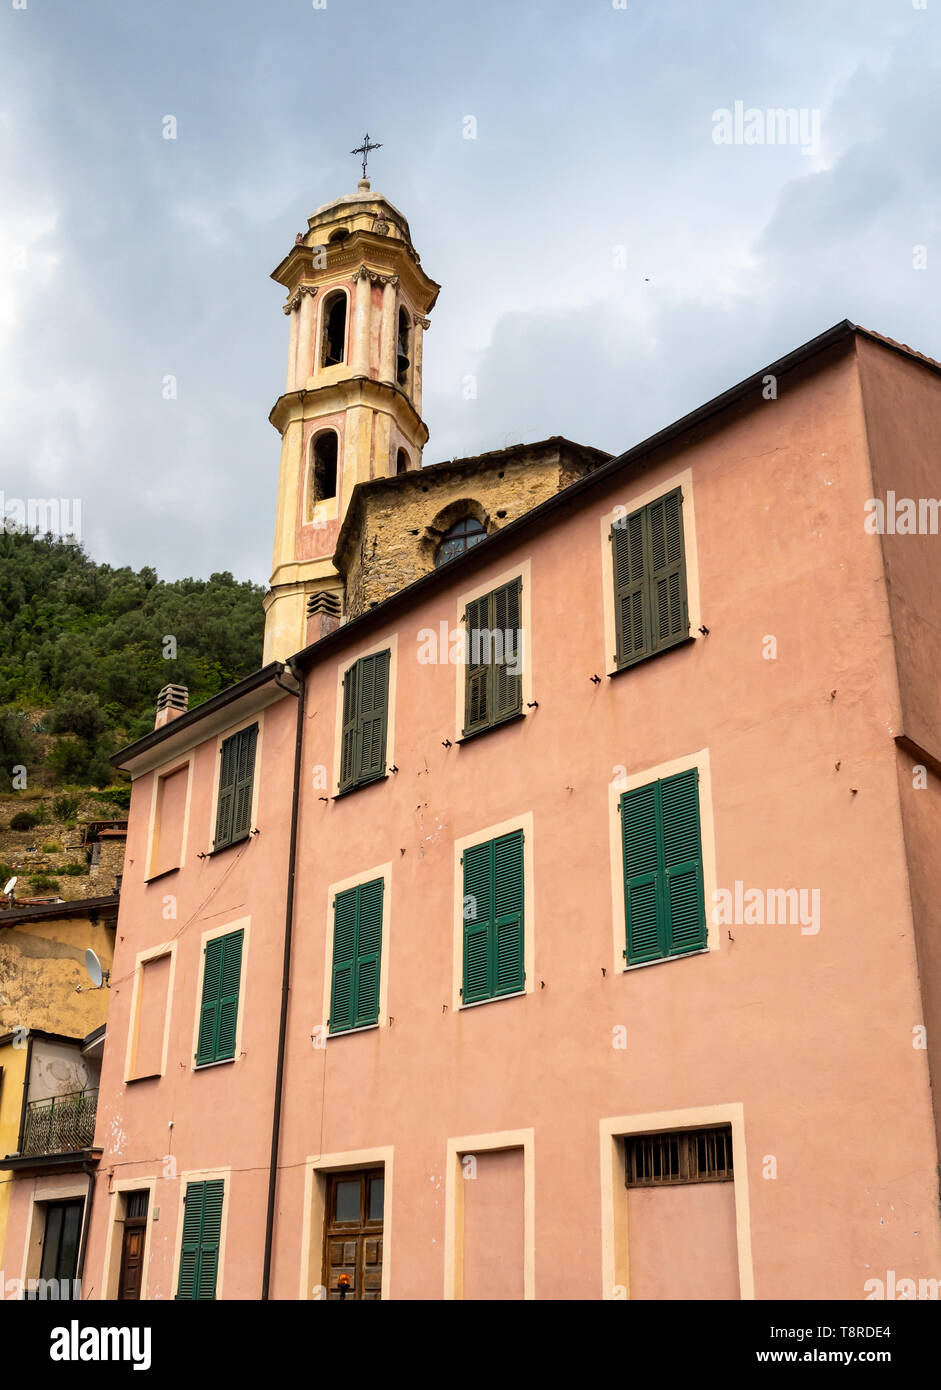 view of typical building and bell tower in Badalucco Liguria, Italy in summer Stock Photo